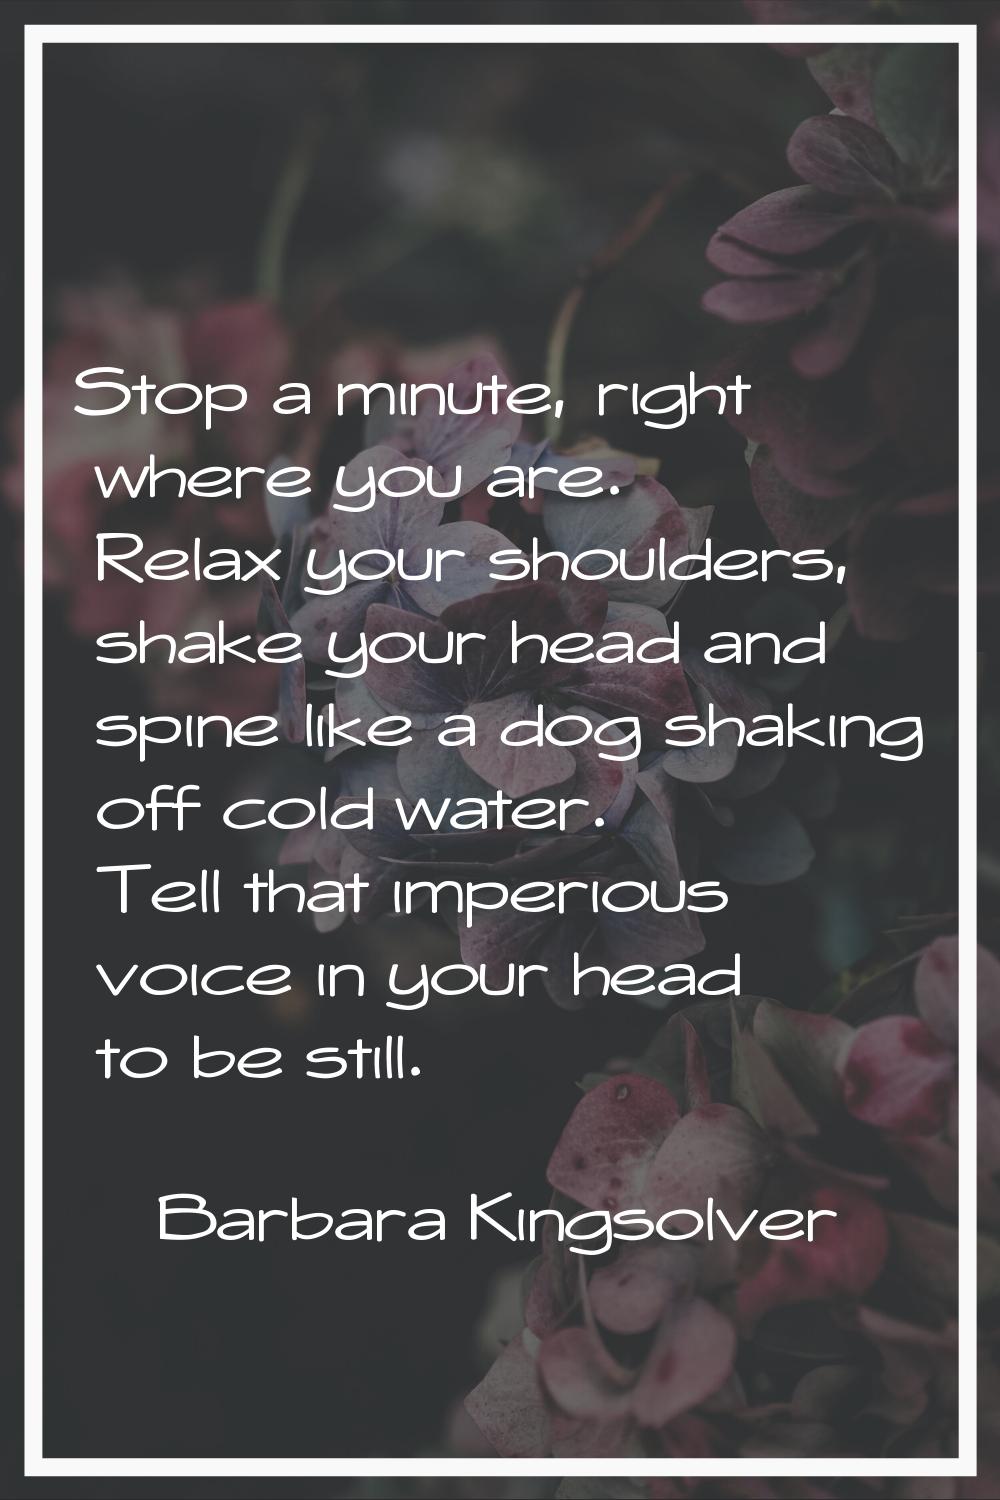 Stop a minute, right where you are. Relax your shoulders, shake your head and spine like a dog shak